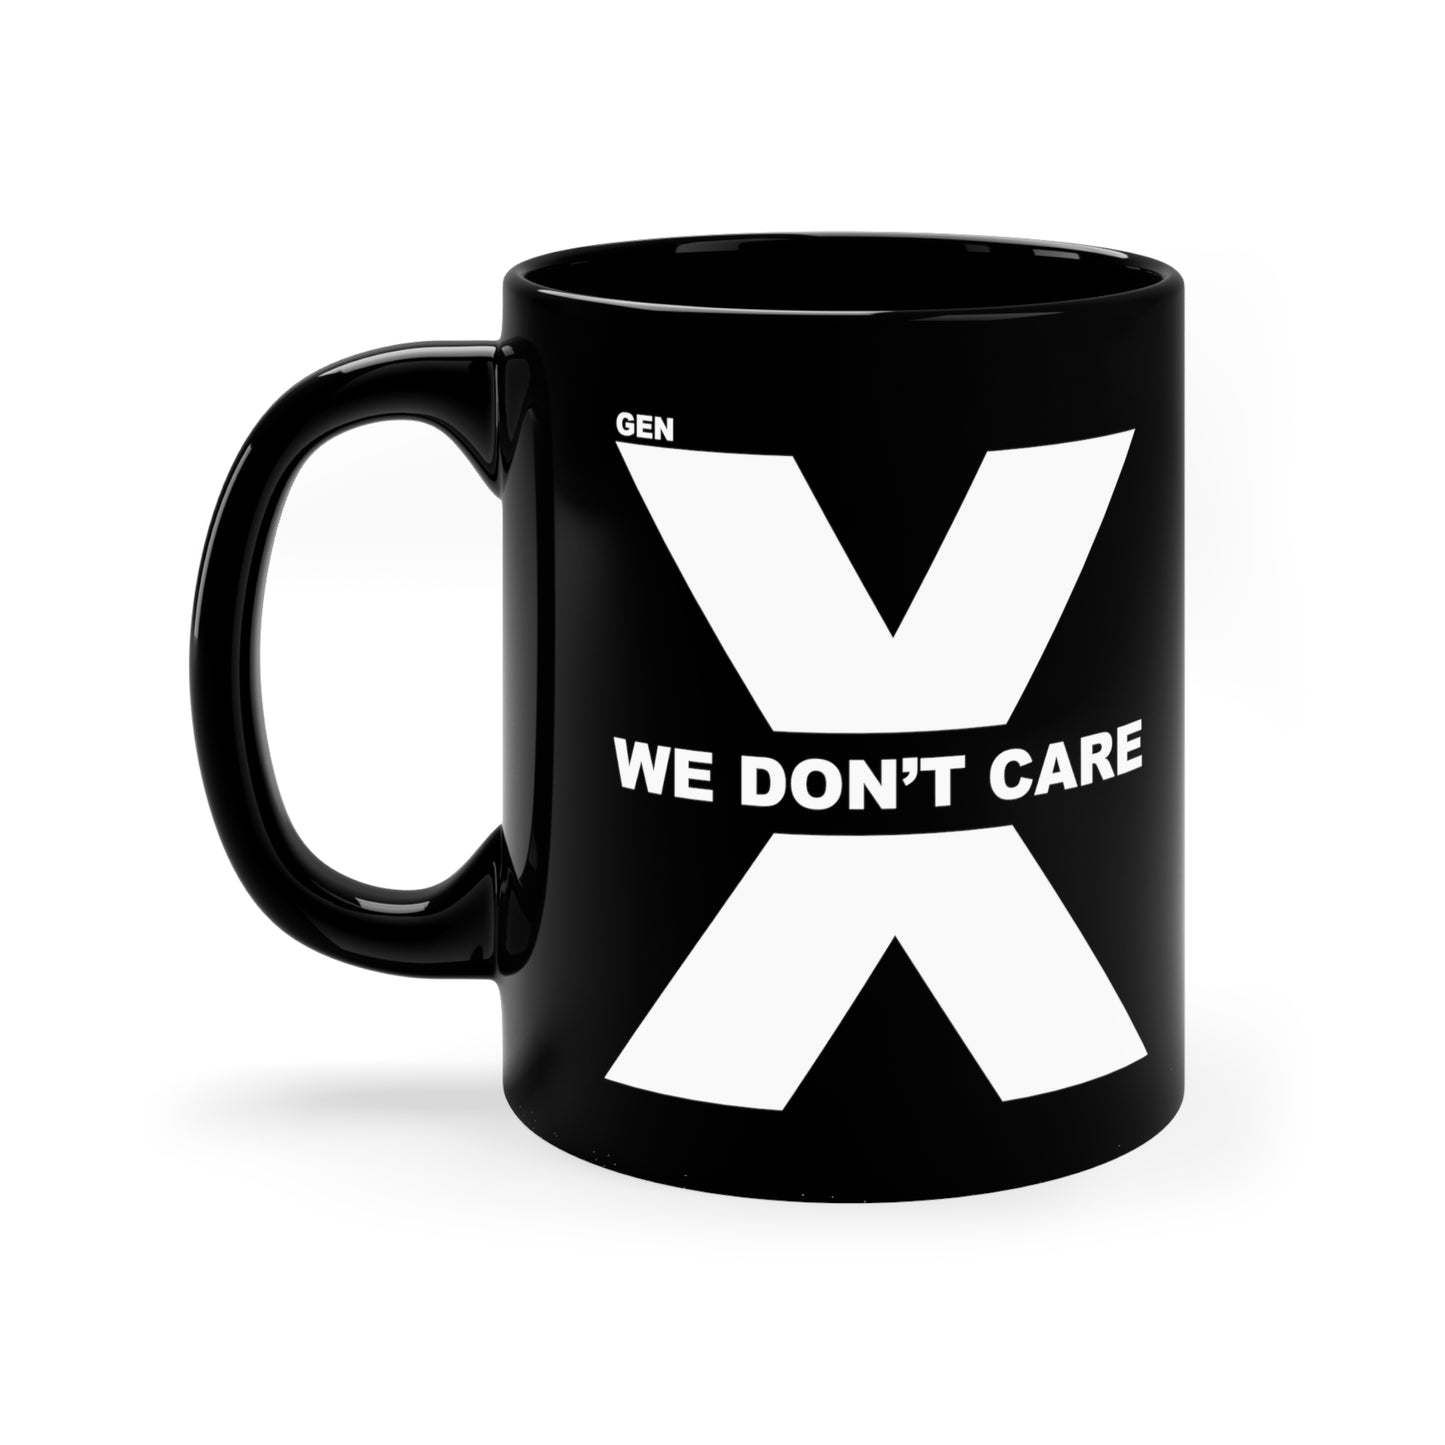 Generation Mood's exclusive Gen X mug combines retro vibes with a modern edge. Double sided.